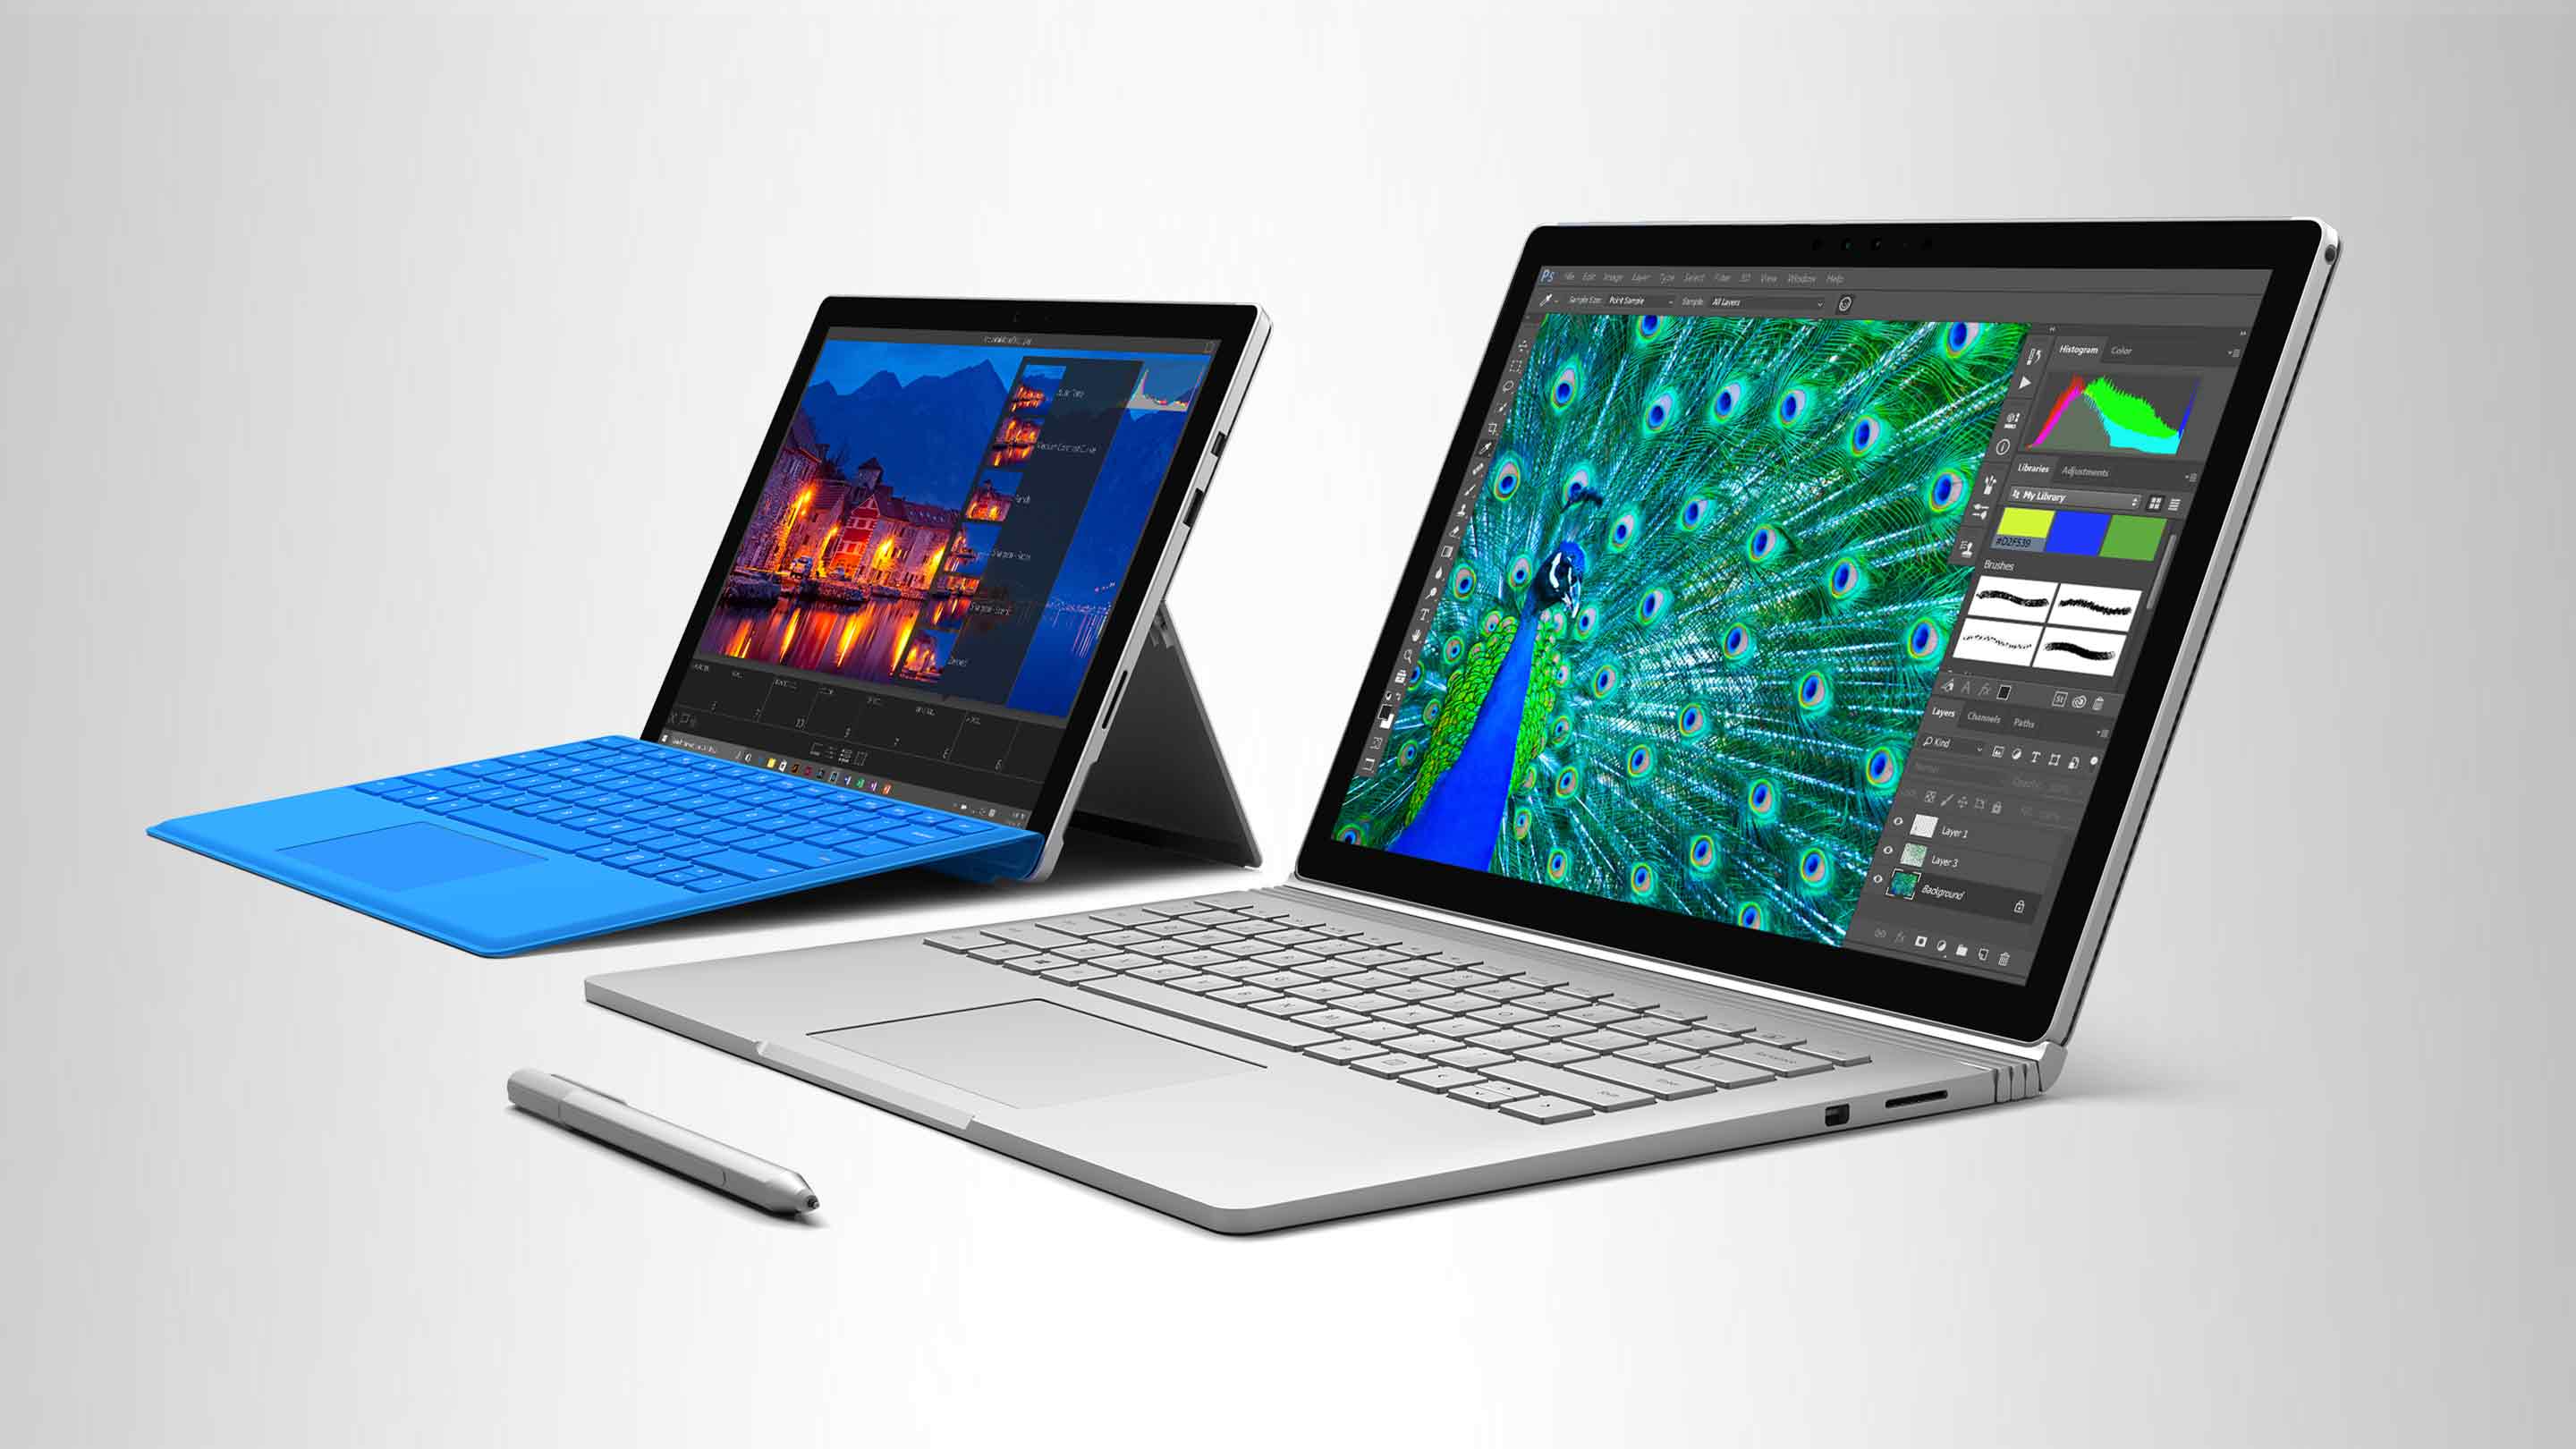 Surface Book e Surface Pro 4